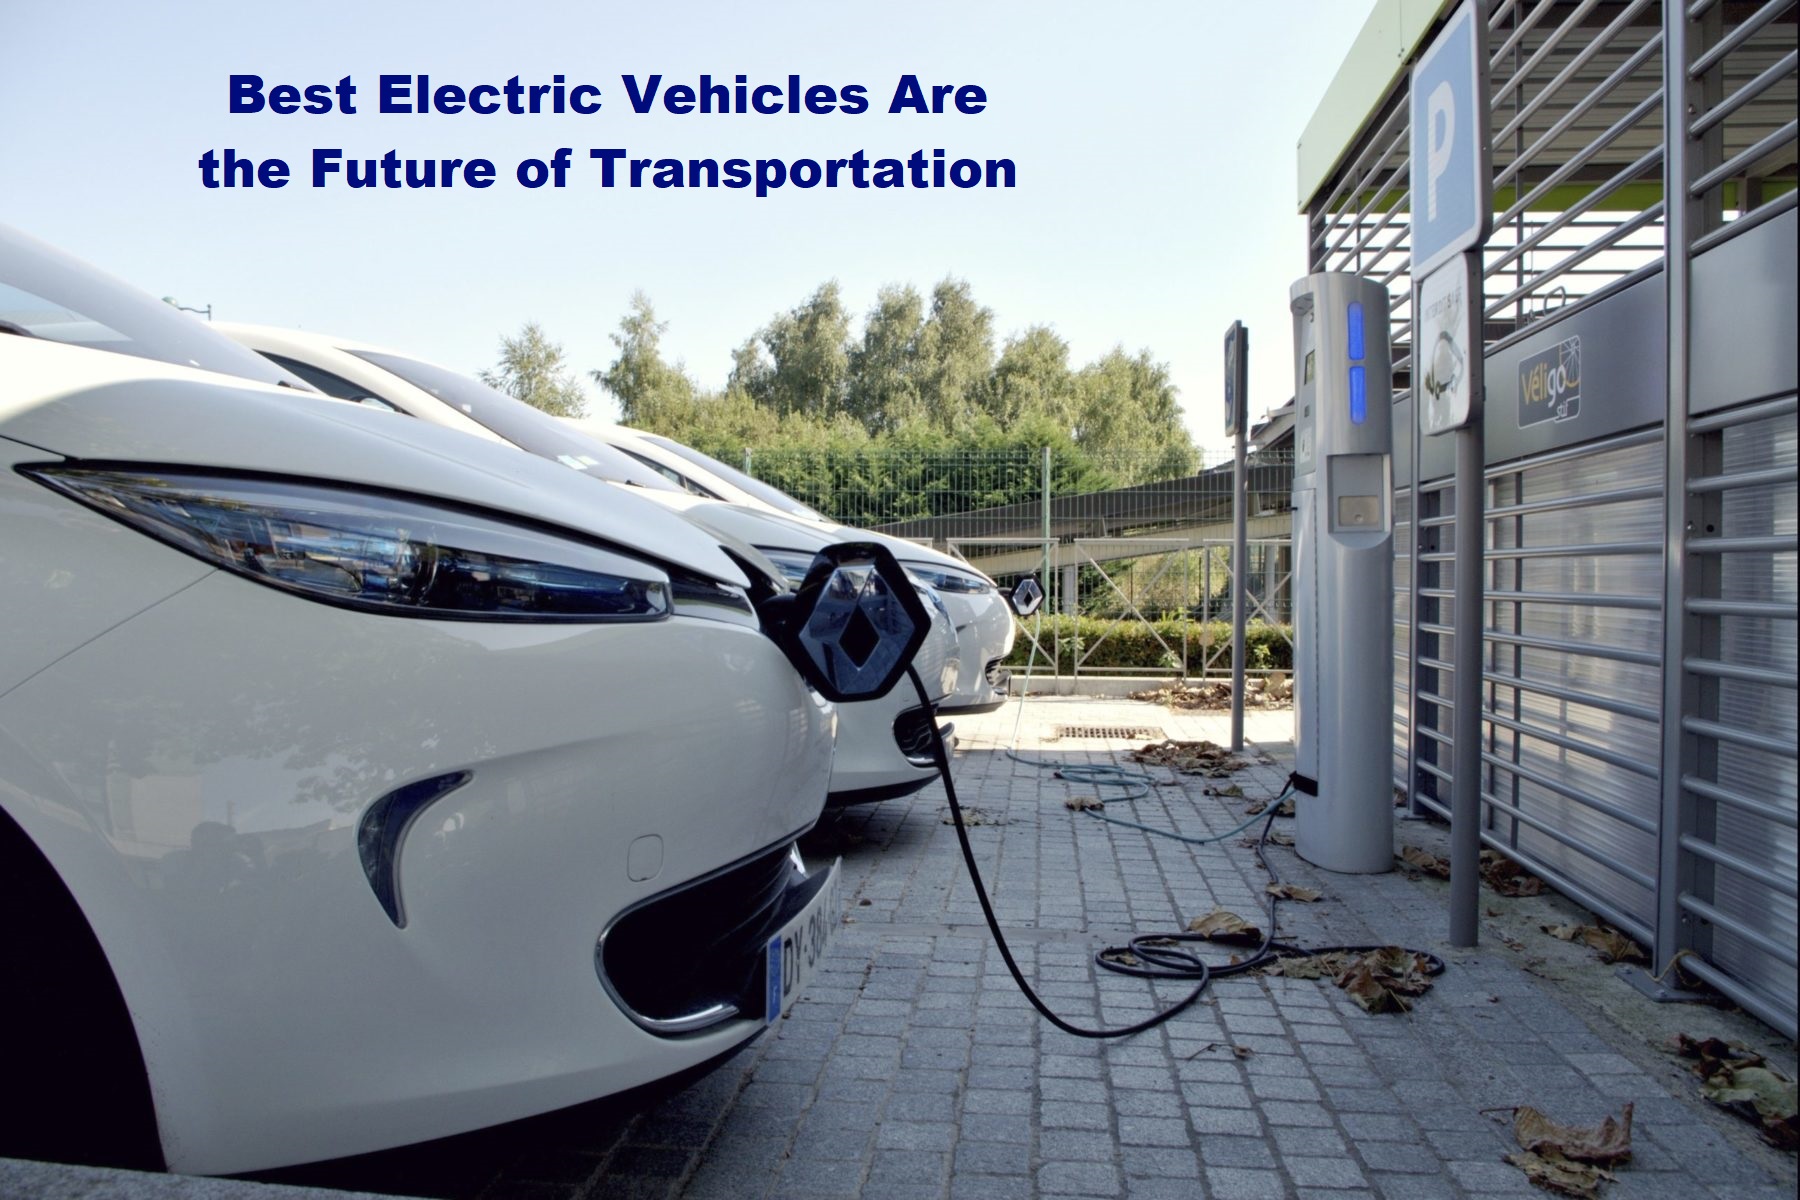 Best Electric Vehicles Are the Future of Transportation